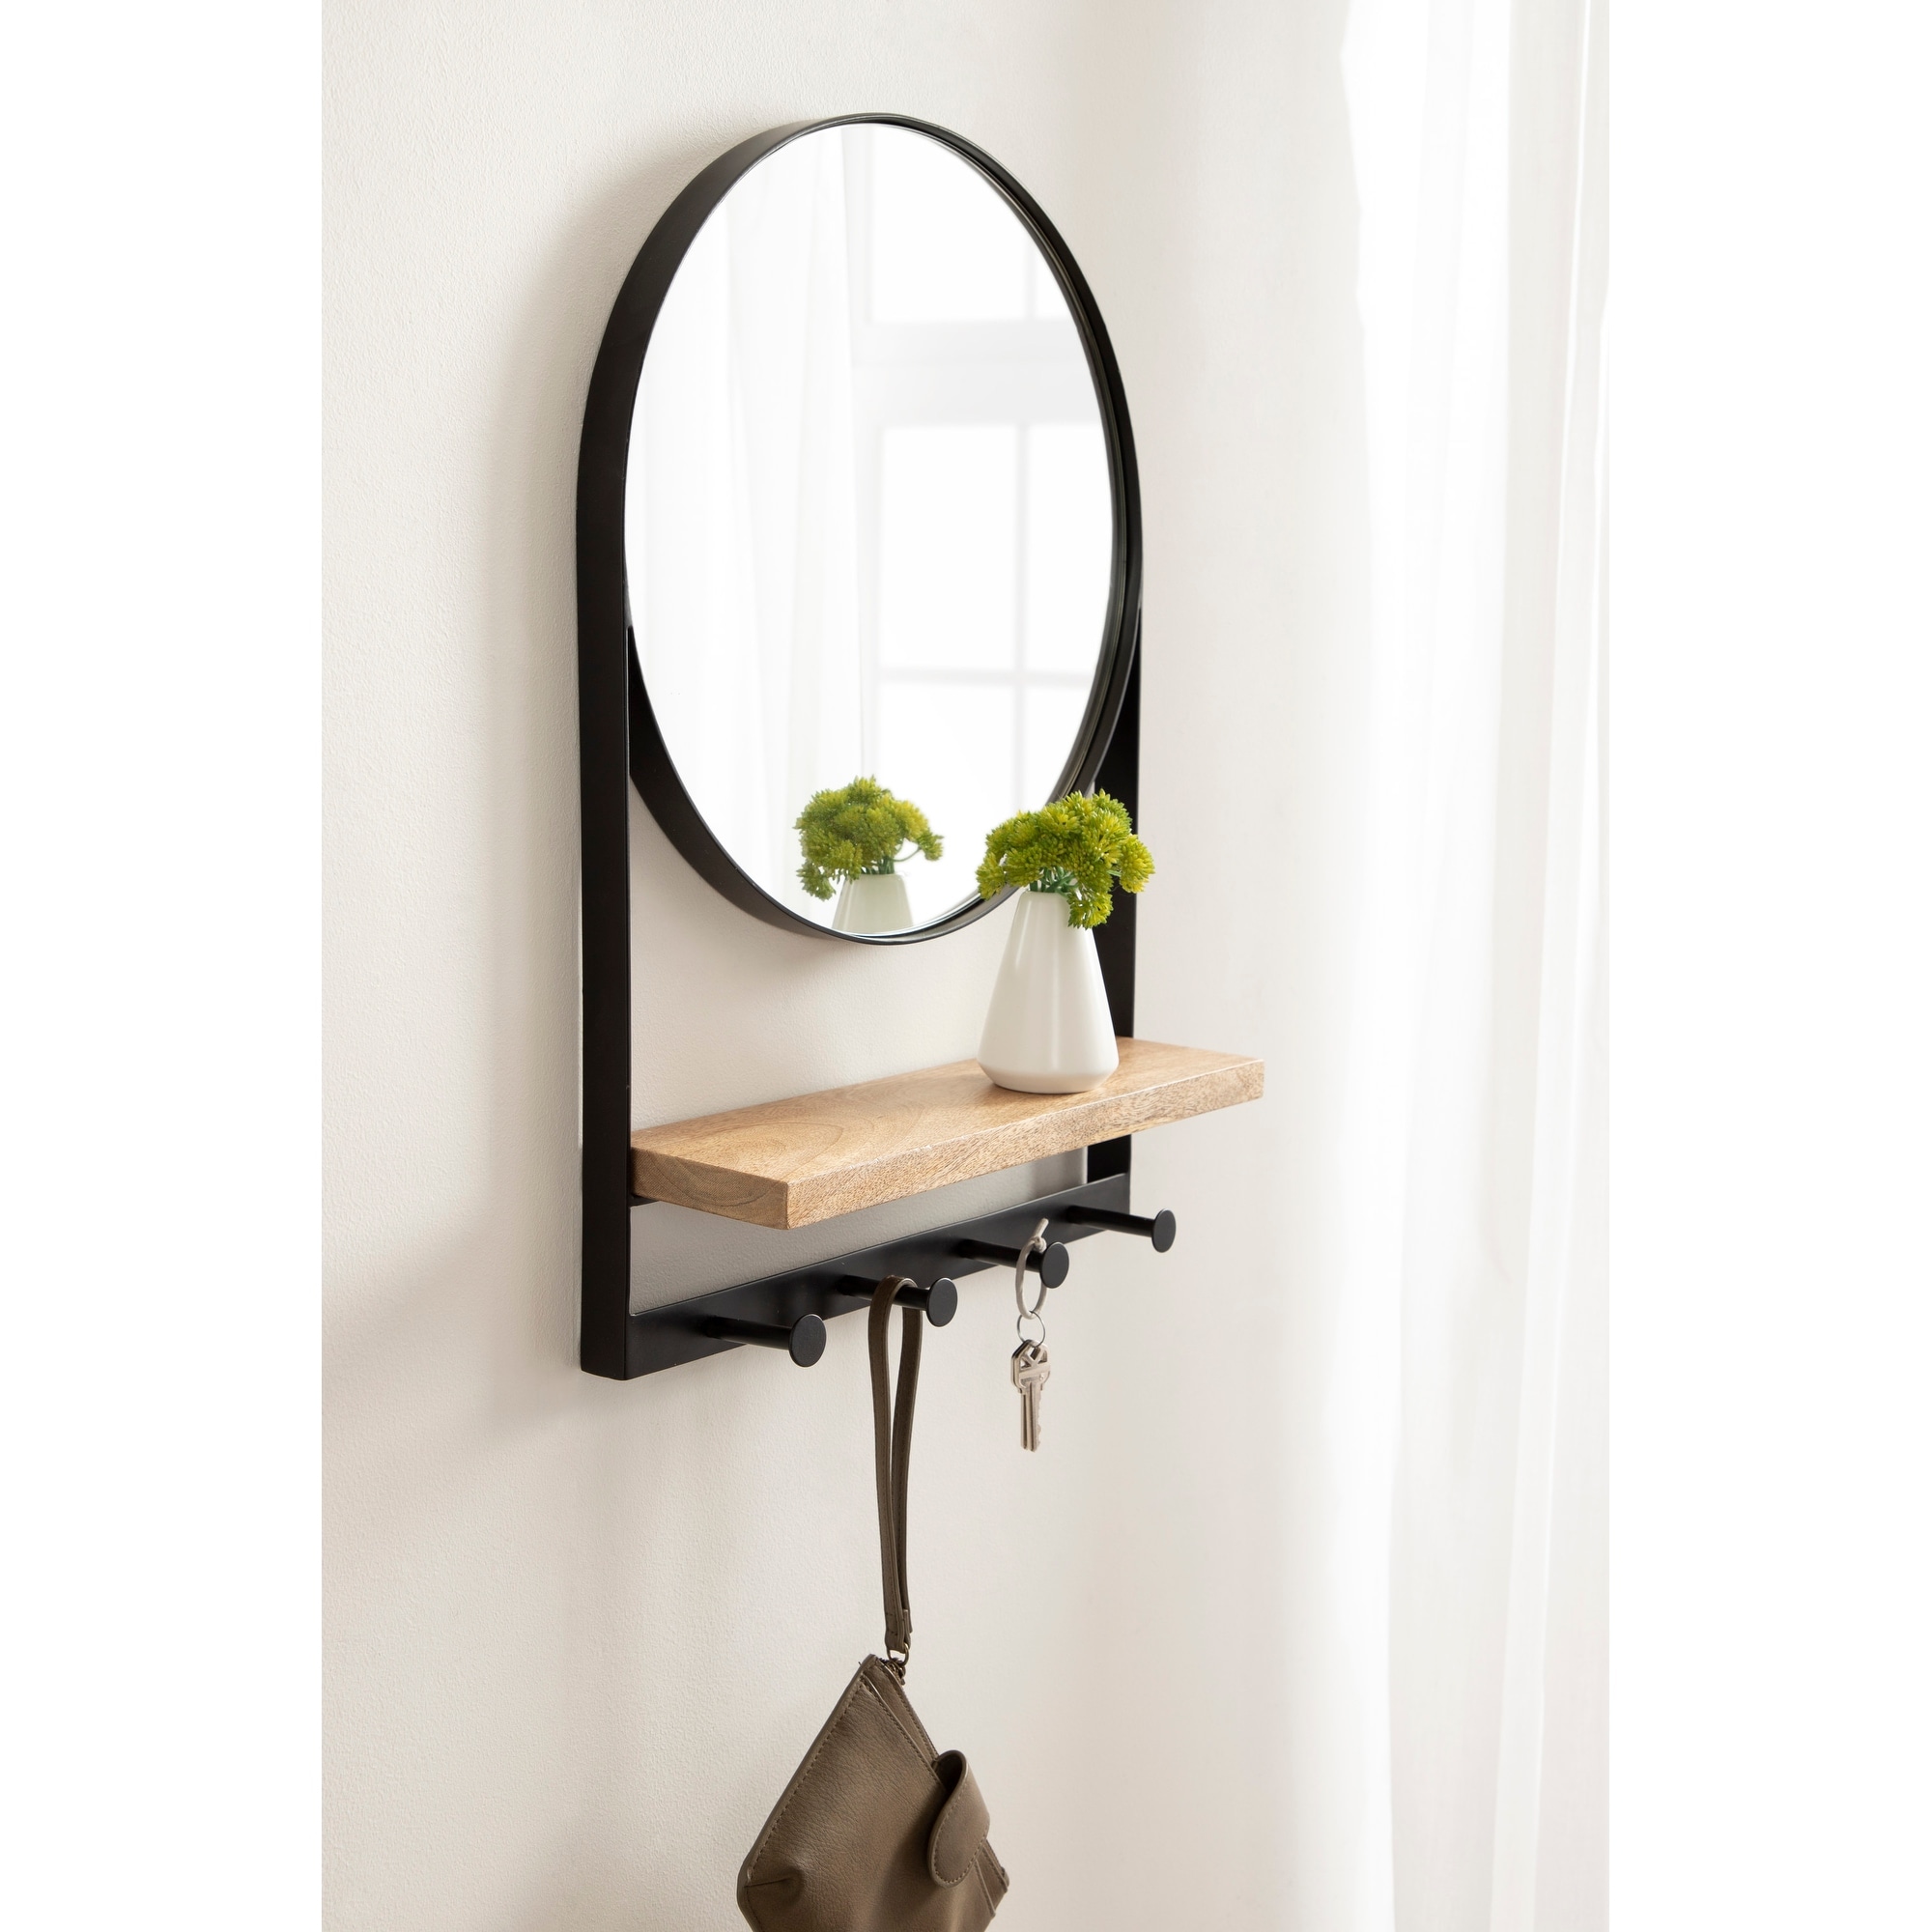 https://ak1.ostkcdn.com/images/products/is/images/direct/c1adf78599e5a147e84161aeee022ec35f36133c/Kate-and-Laurel-Chadwin-Round-Mirror-with-Shelf-and-Hooks.jpg